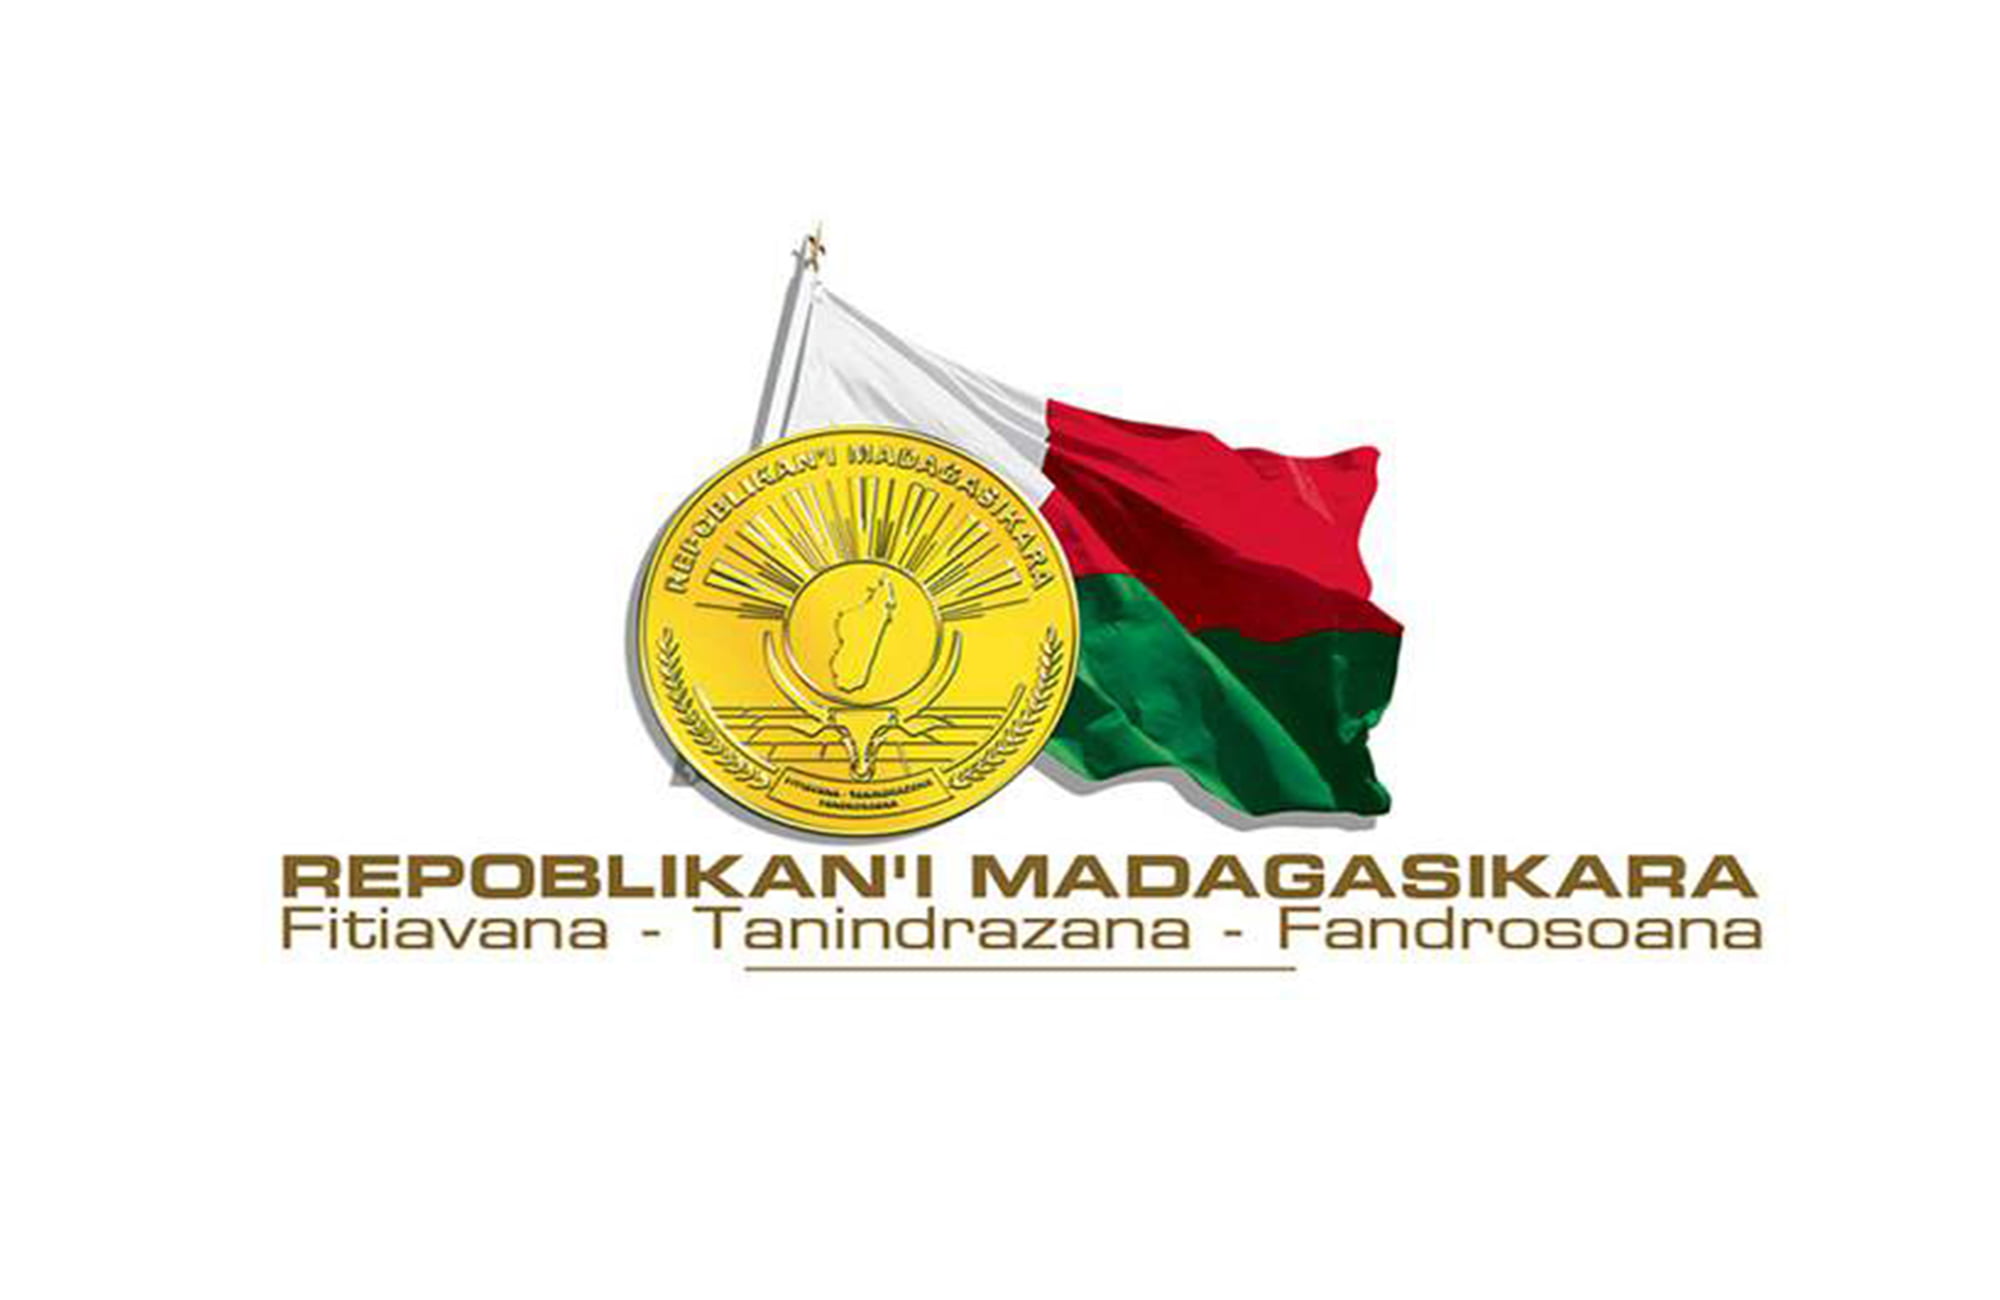 The Malagasy Government